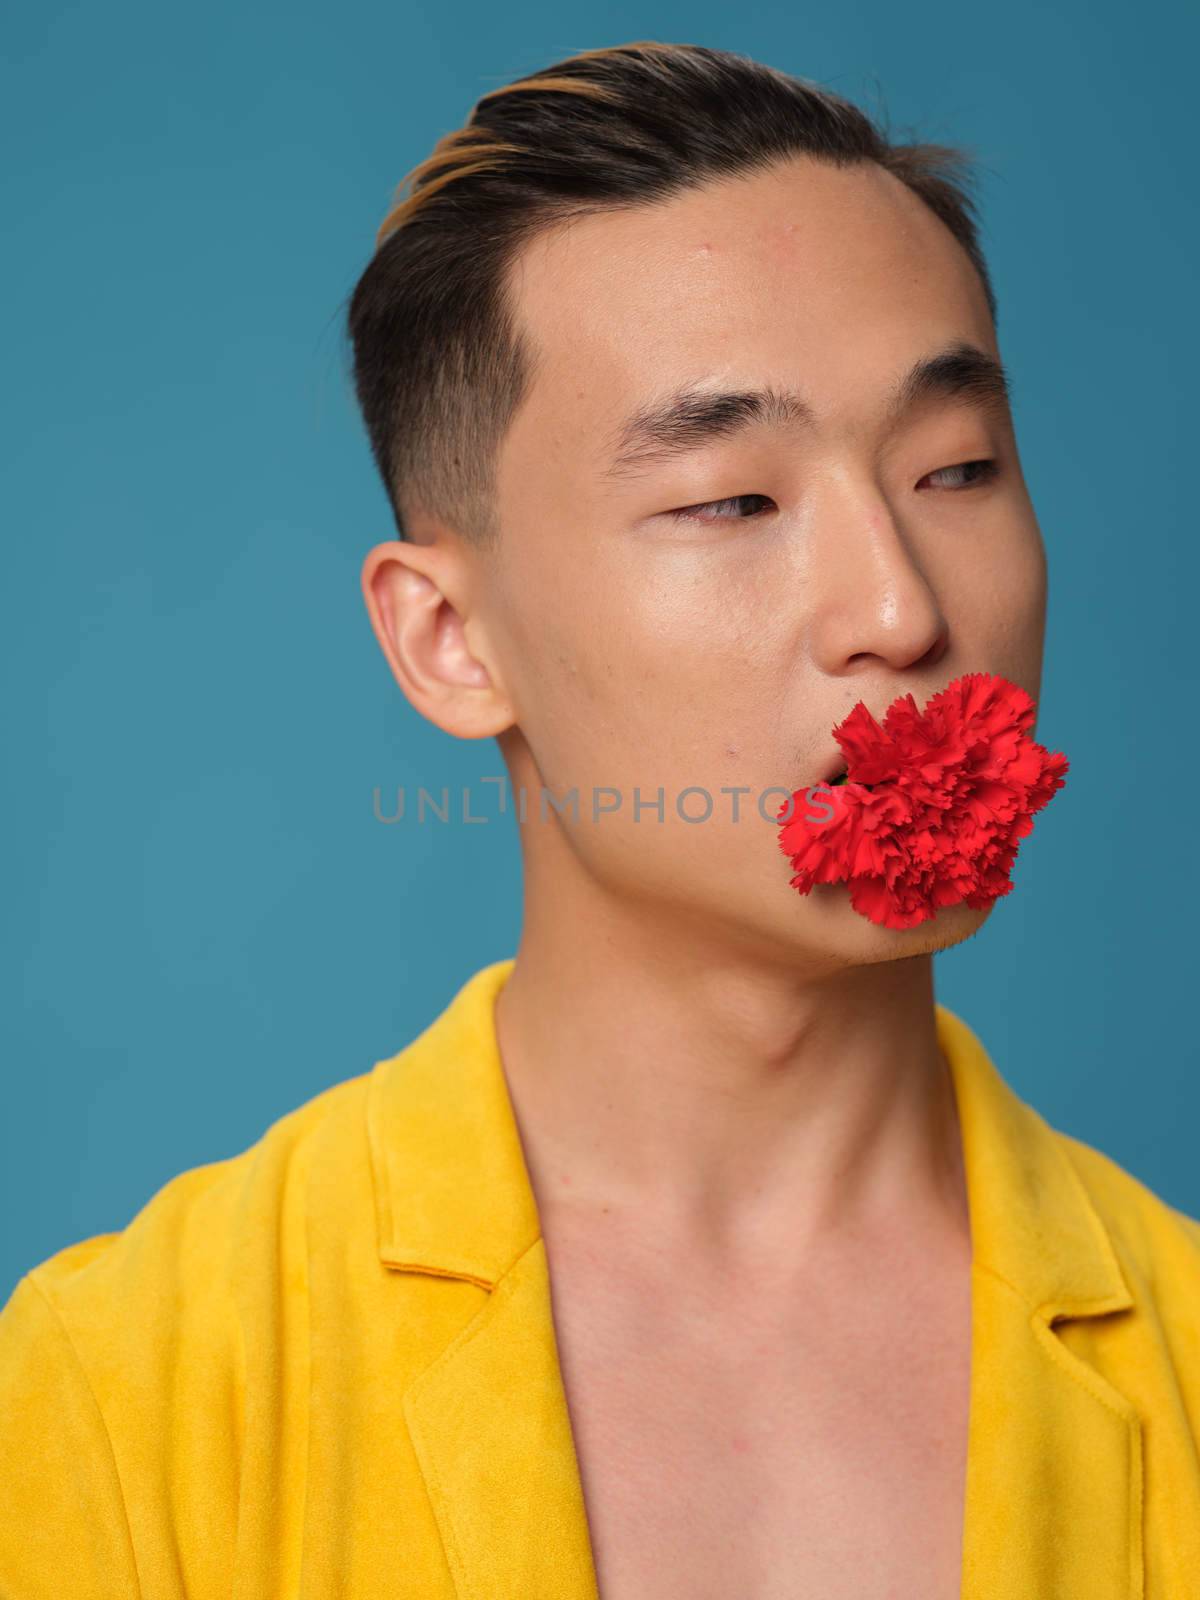 Handsome Asian man with a flower in his teeth and a yellow coat fashion by SHOTPRIME